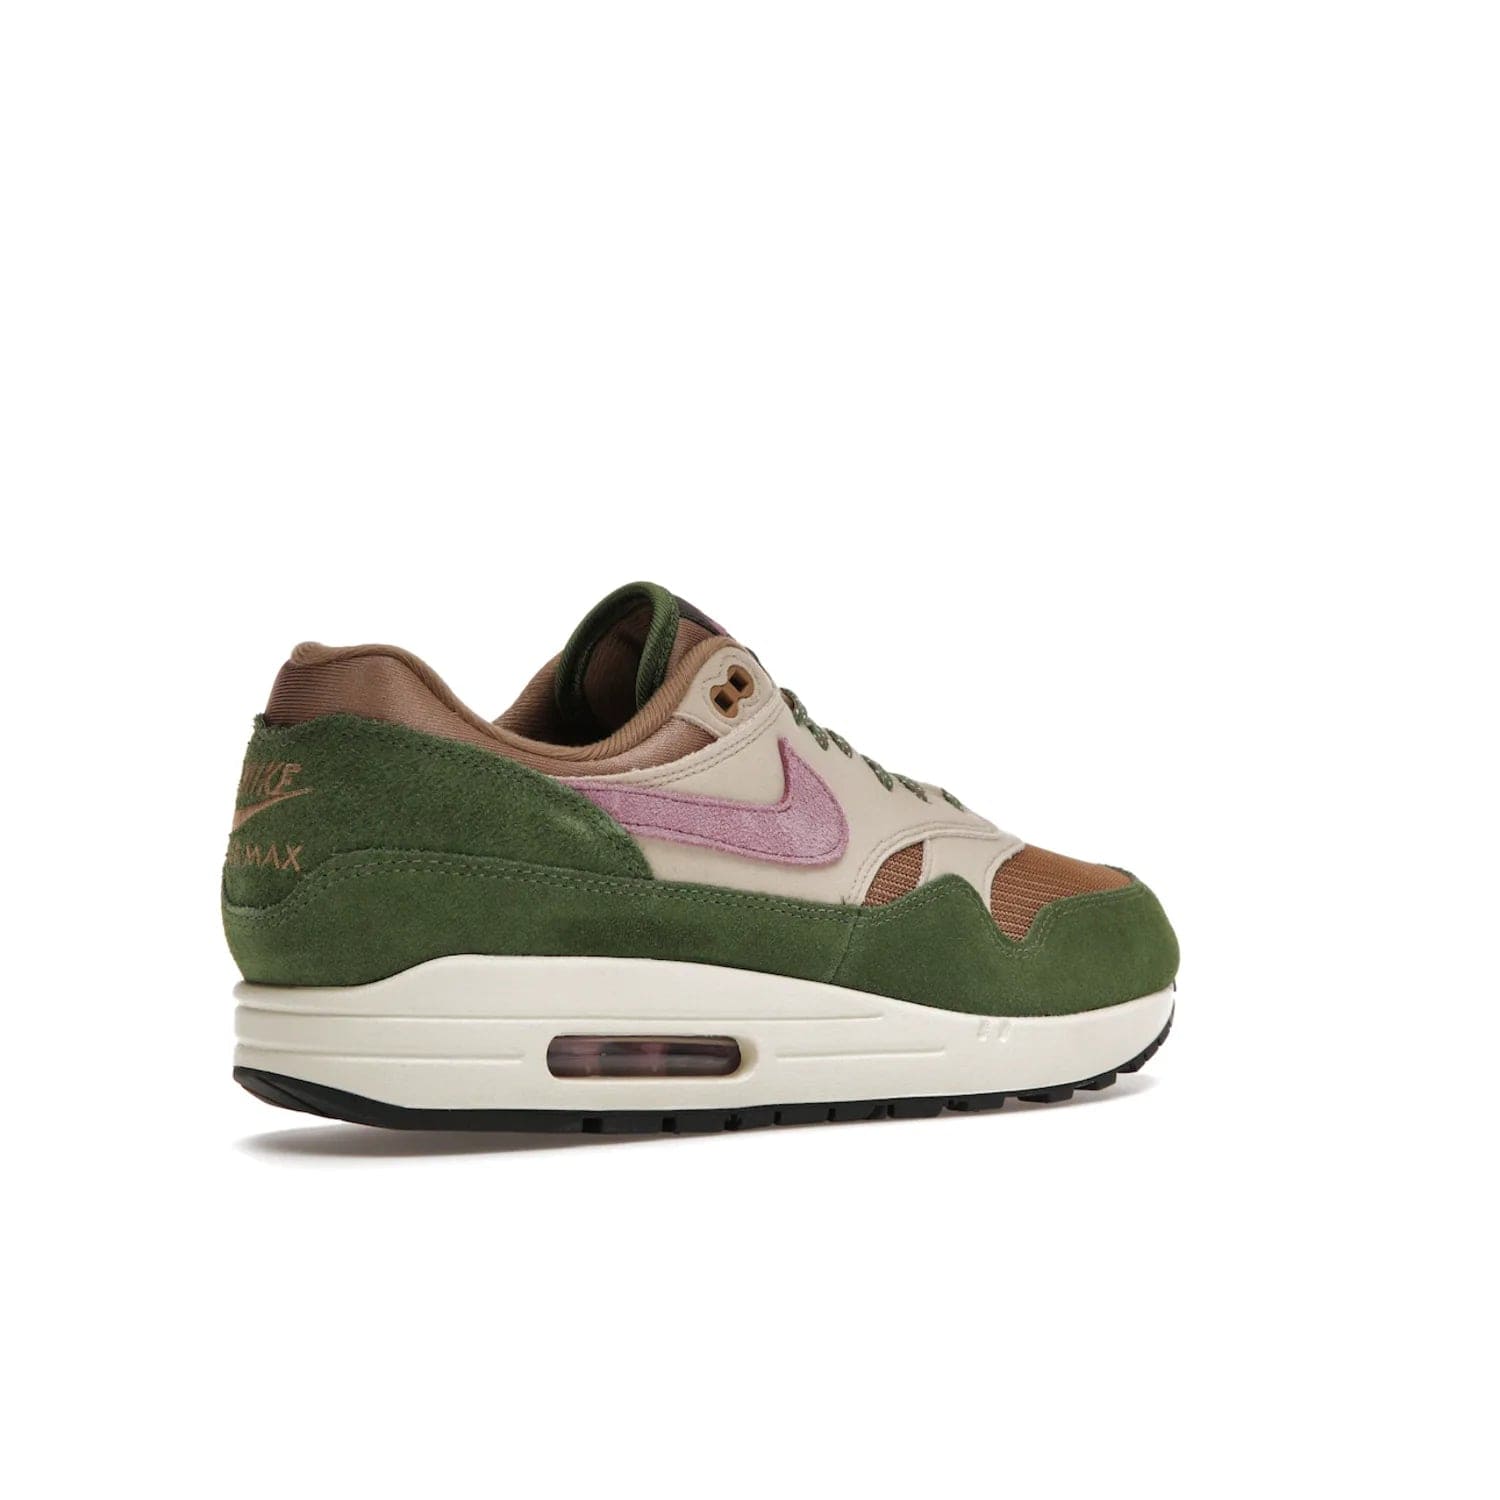 Nike Air Max 1 SH Treeline - Image 33 - Only at www.BallersClubKickz.com - A classic Nike Air Max 1 SH Treeline with a brown mesh upper, taupe Durabuck overlays, and hairy green suede details. Light Bordeaux Swoosh and woven tongue label for a pop of color. Released in May 2022. Perfect for any outfit and sure to impress.